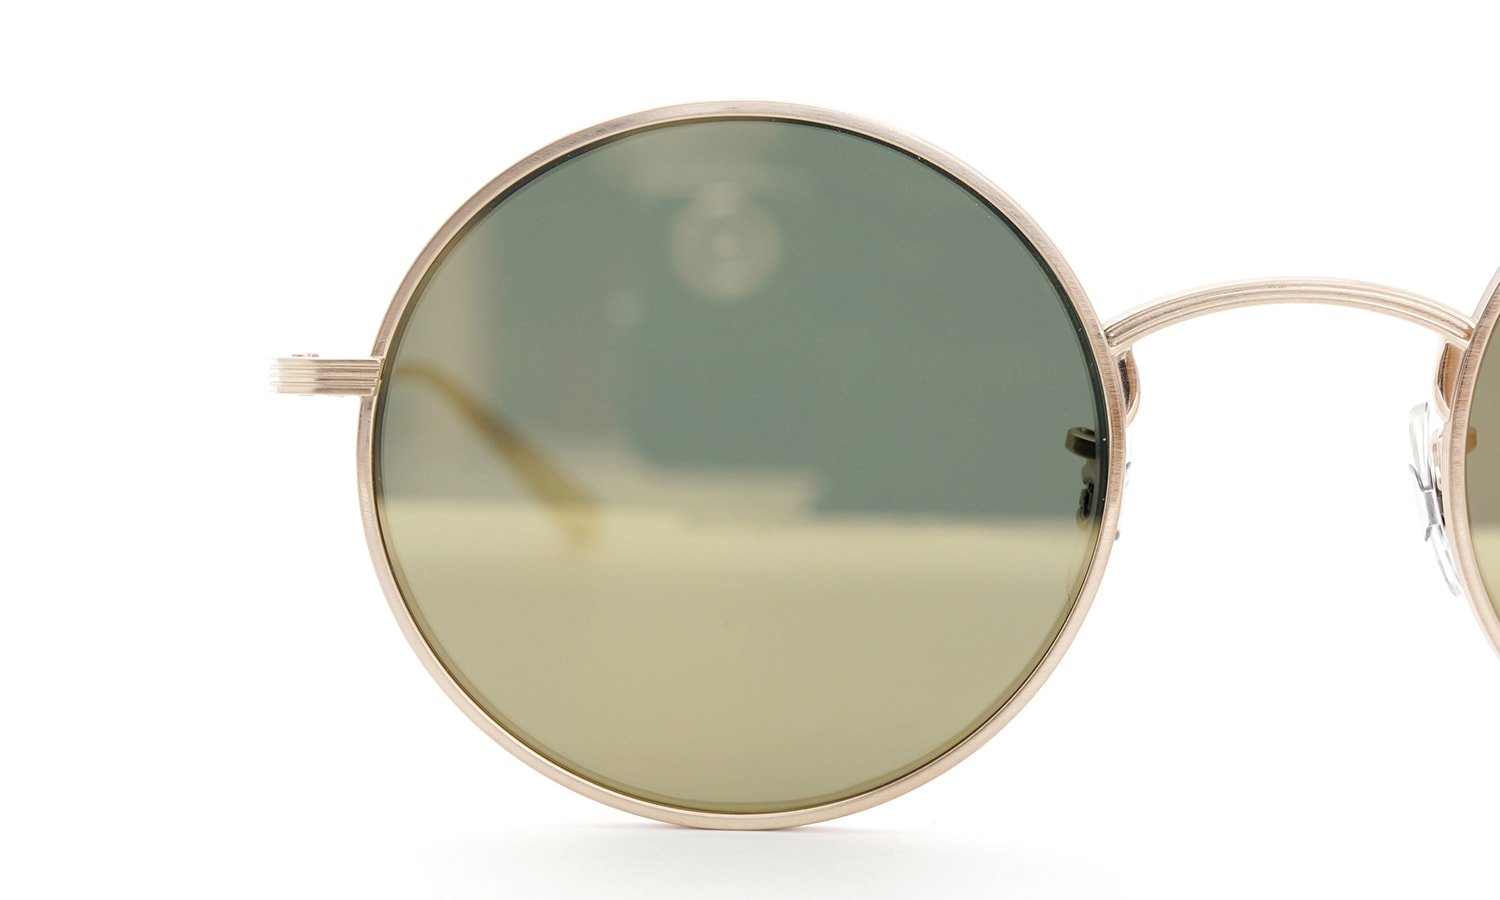 OLIVER PEOPLES×THE ROW AFTER MIDNIGHT BG/GM